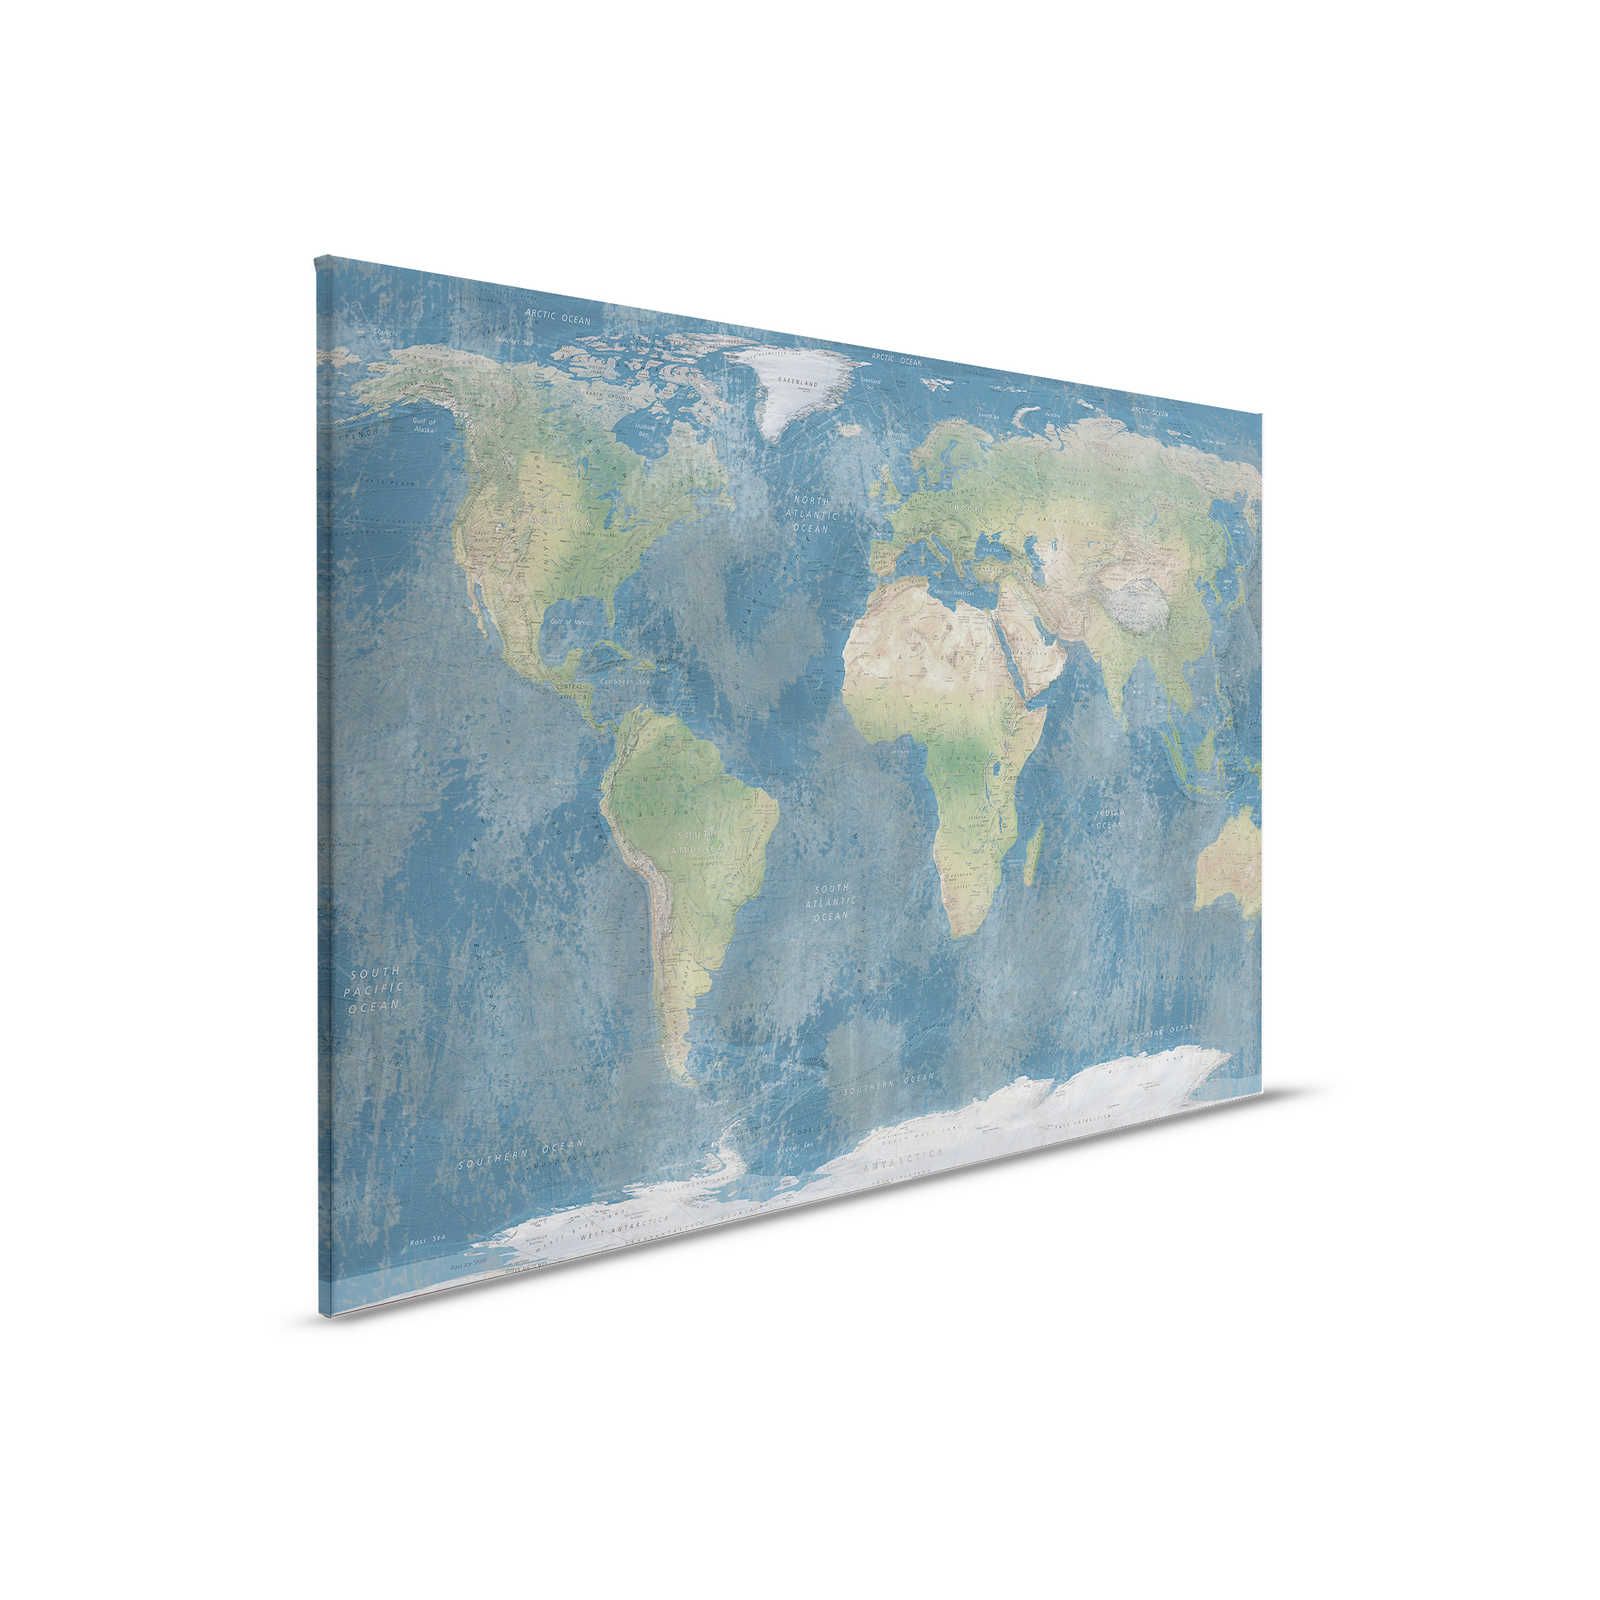         Canvas painting World map in natural colouring - 0,90 m x 0,60 m
    